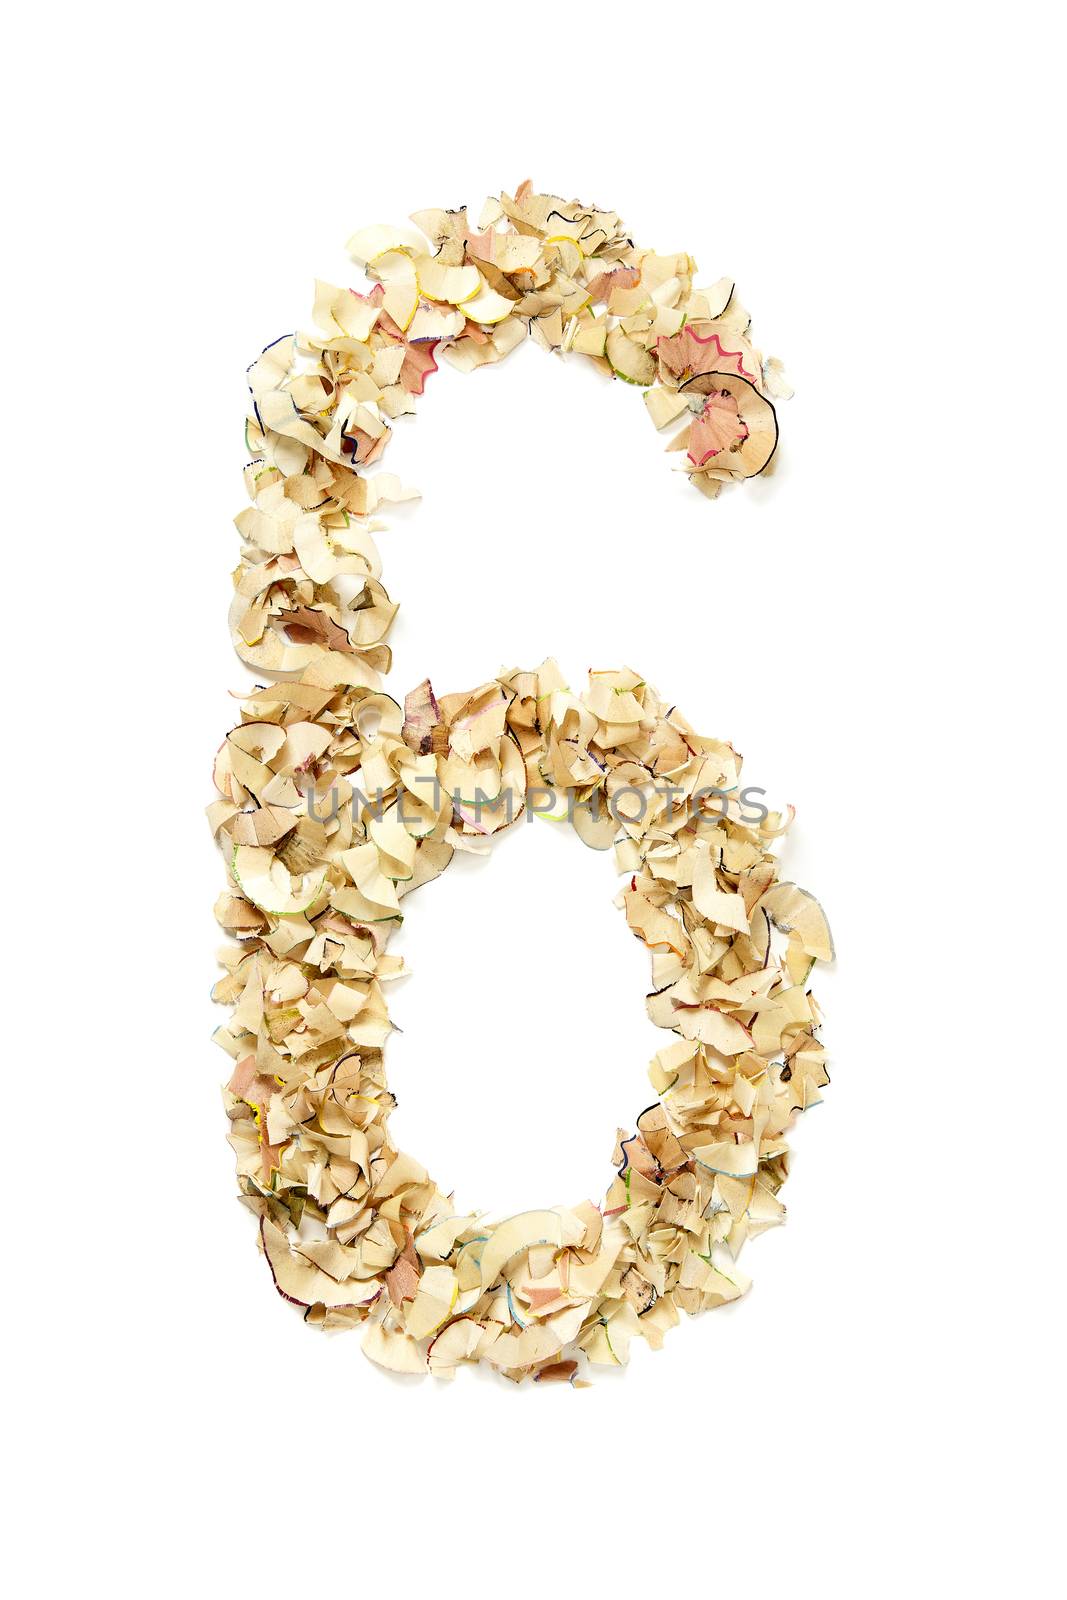 Number 6 made of pencil shavings for your project.